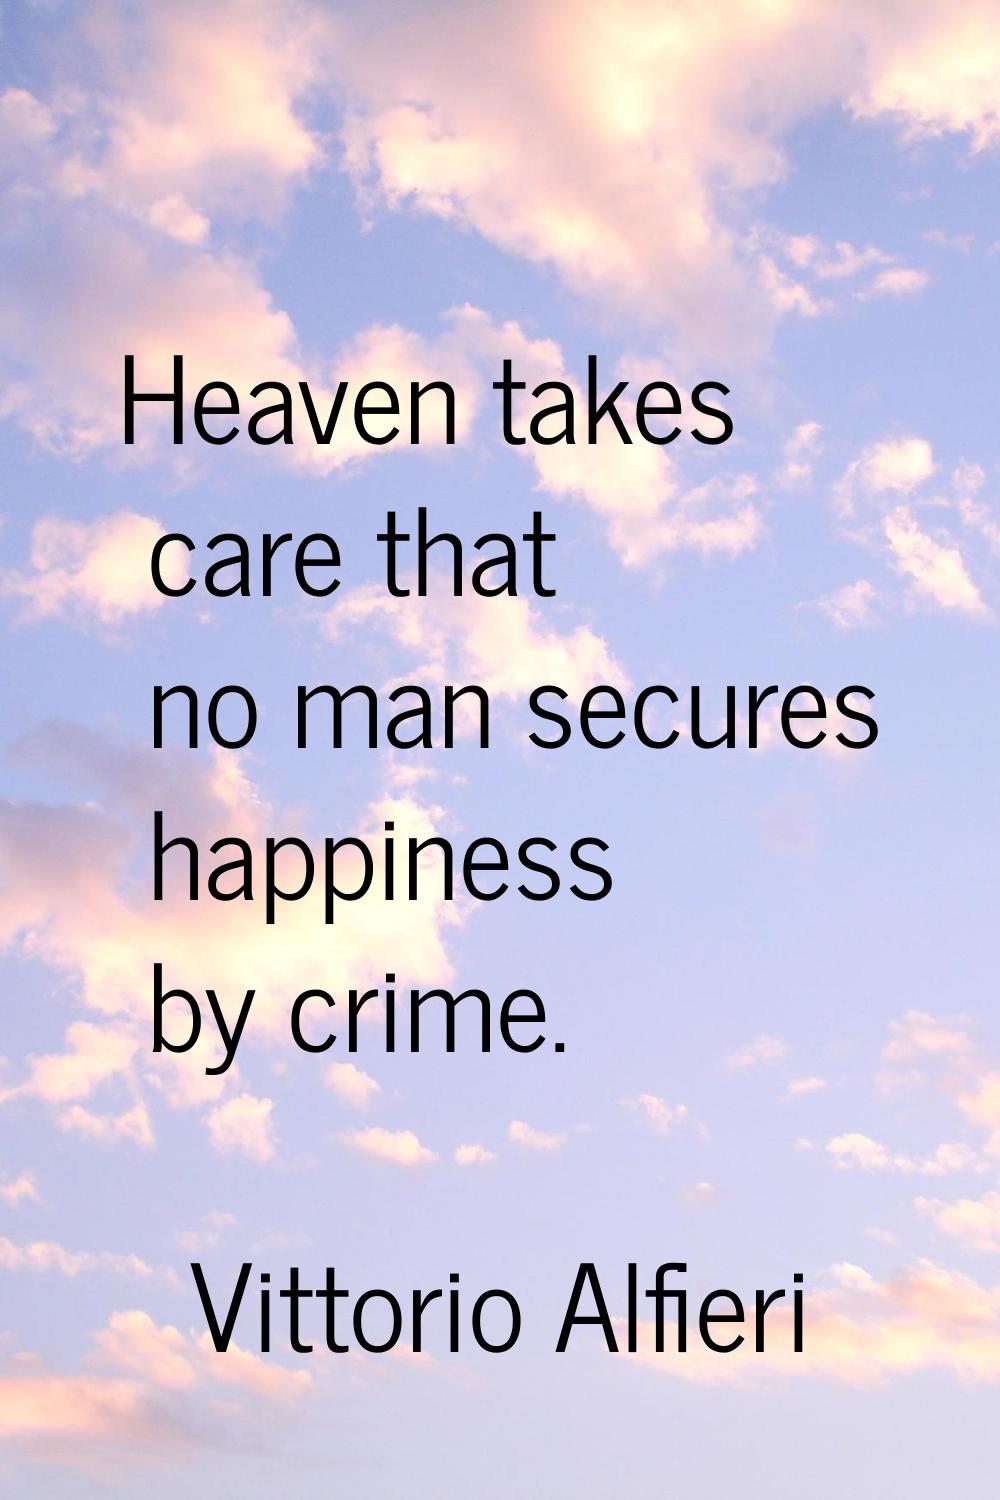 Heaven takes care that no man secures happiness by crime.